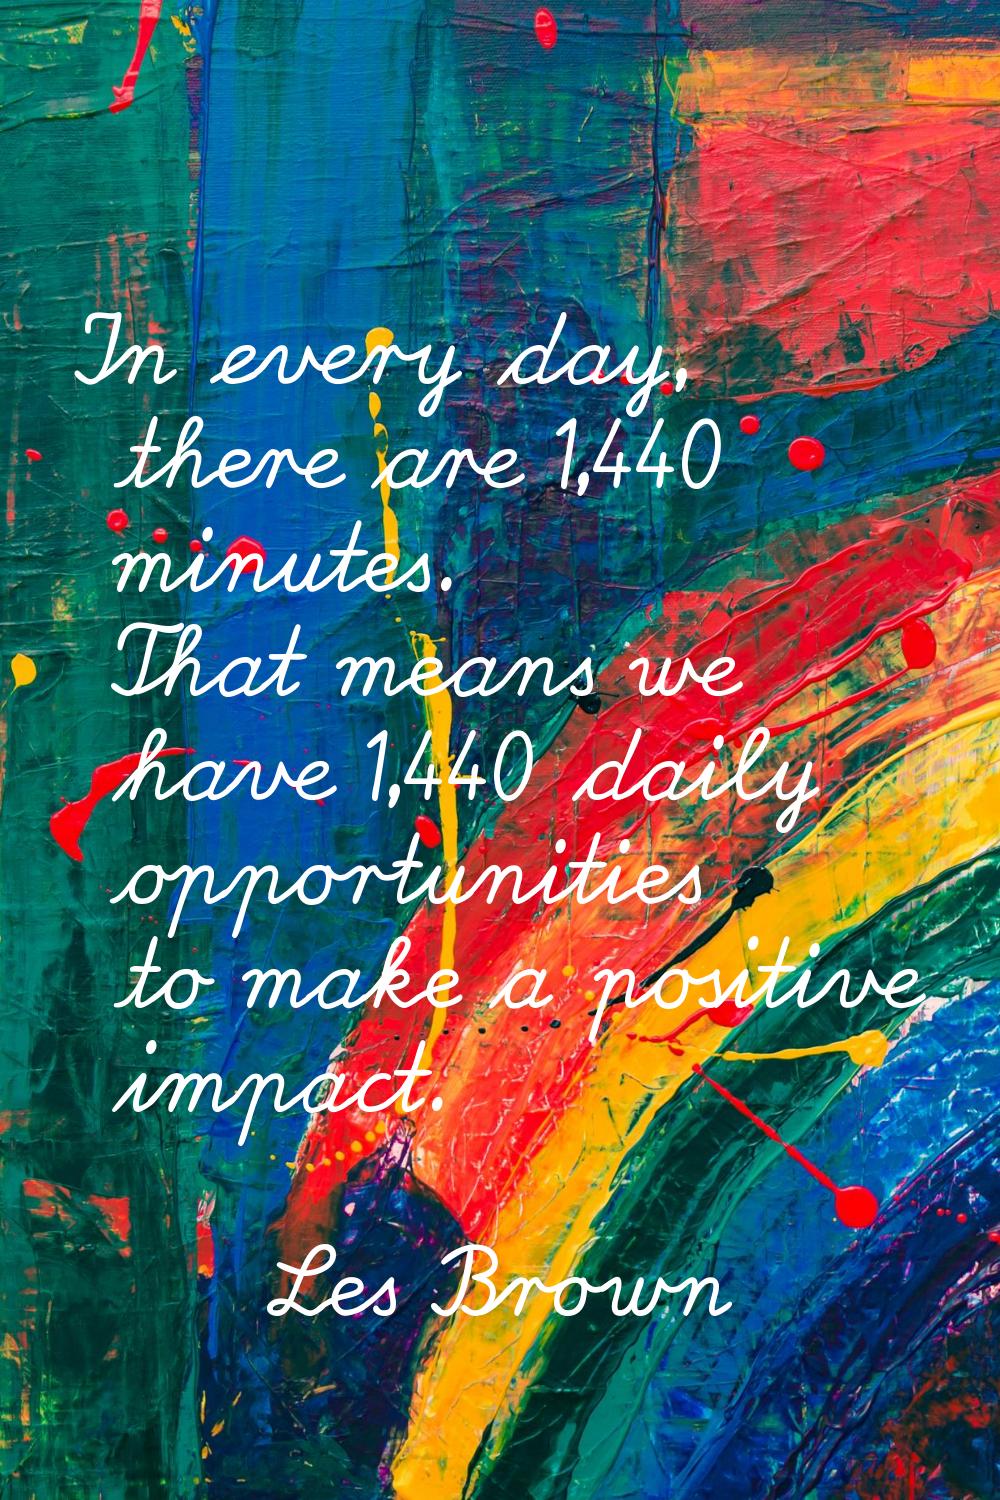 In every day, there are 1,440 minutes. That means we have 1,440 daily opportunities to make a posit